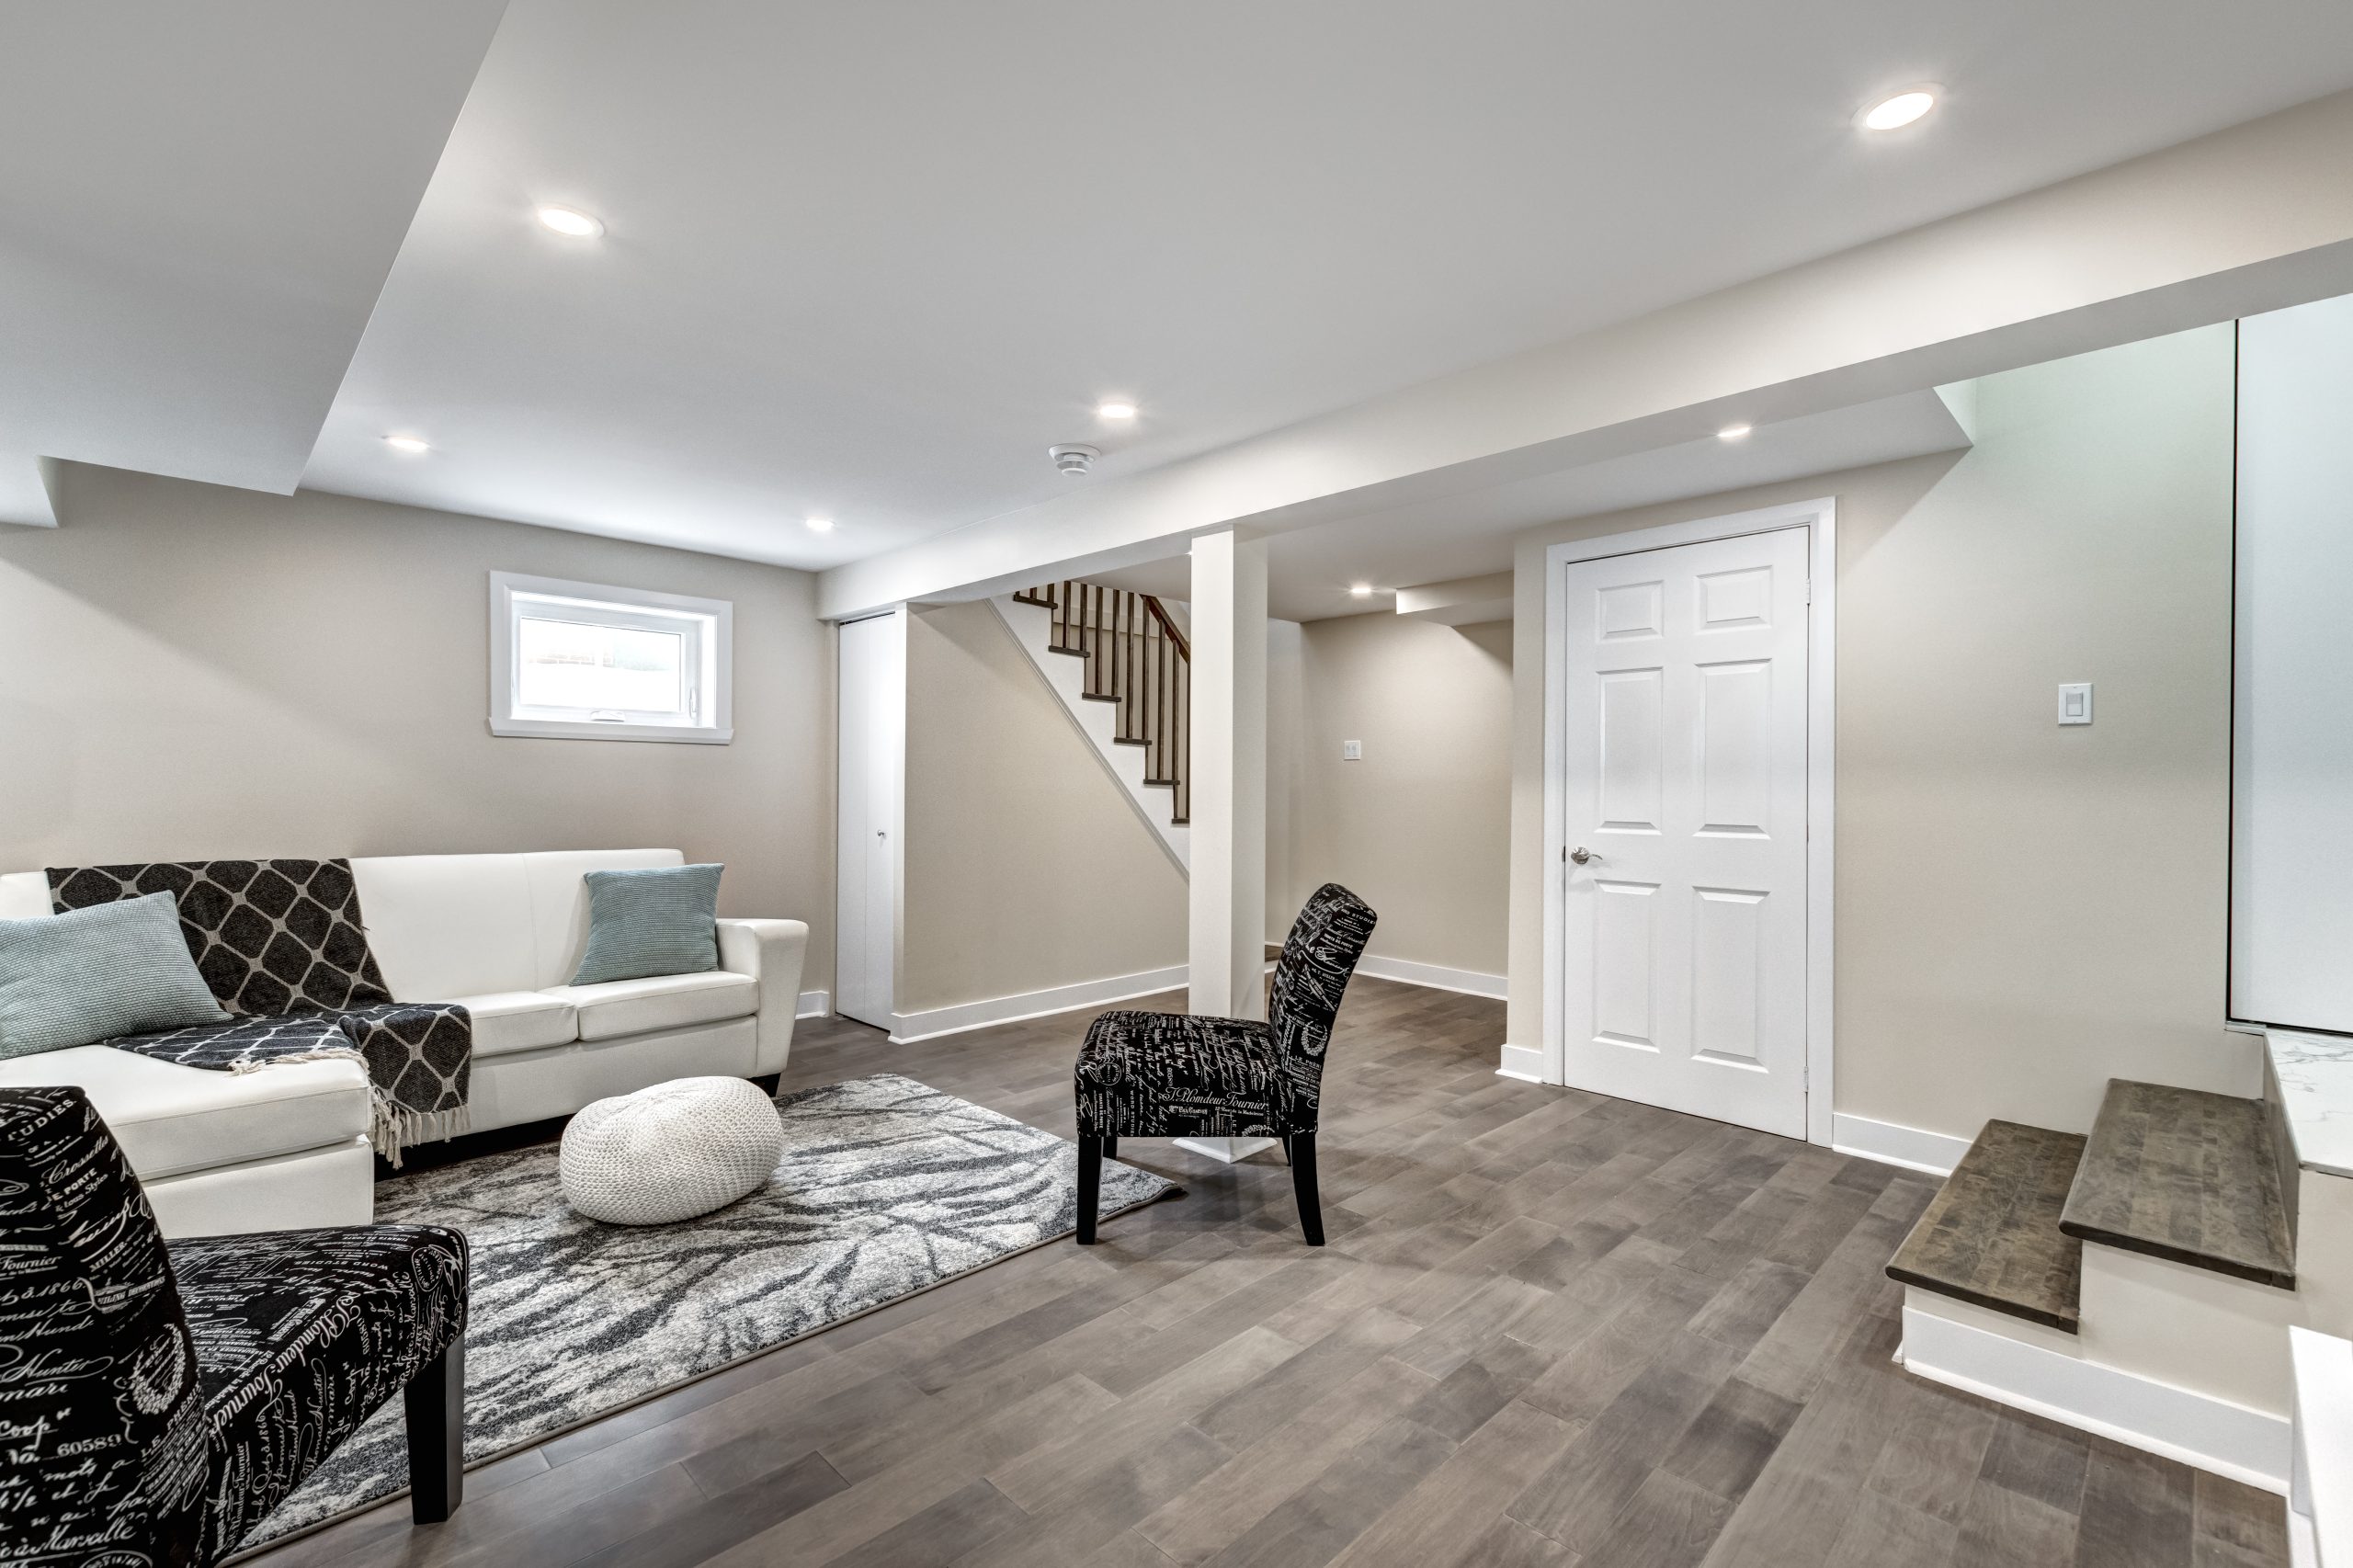 Premier Basement Solutions and Remodeling